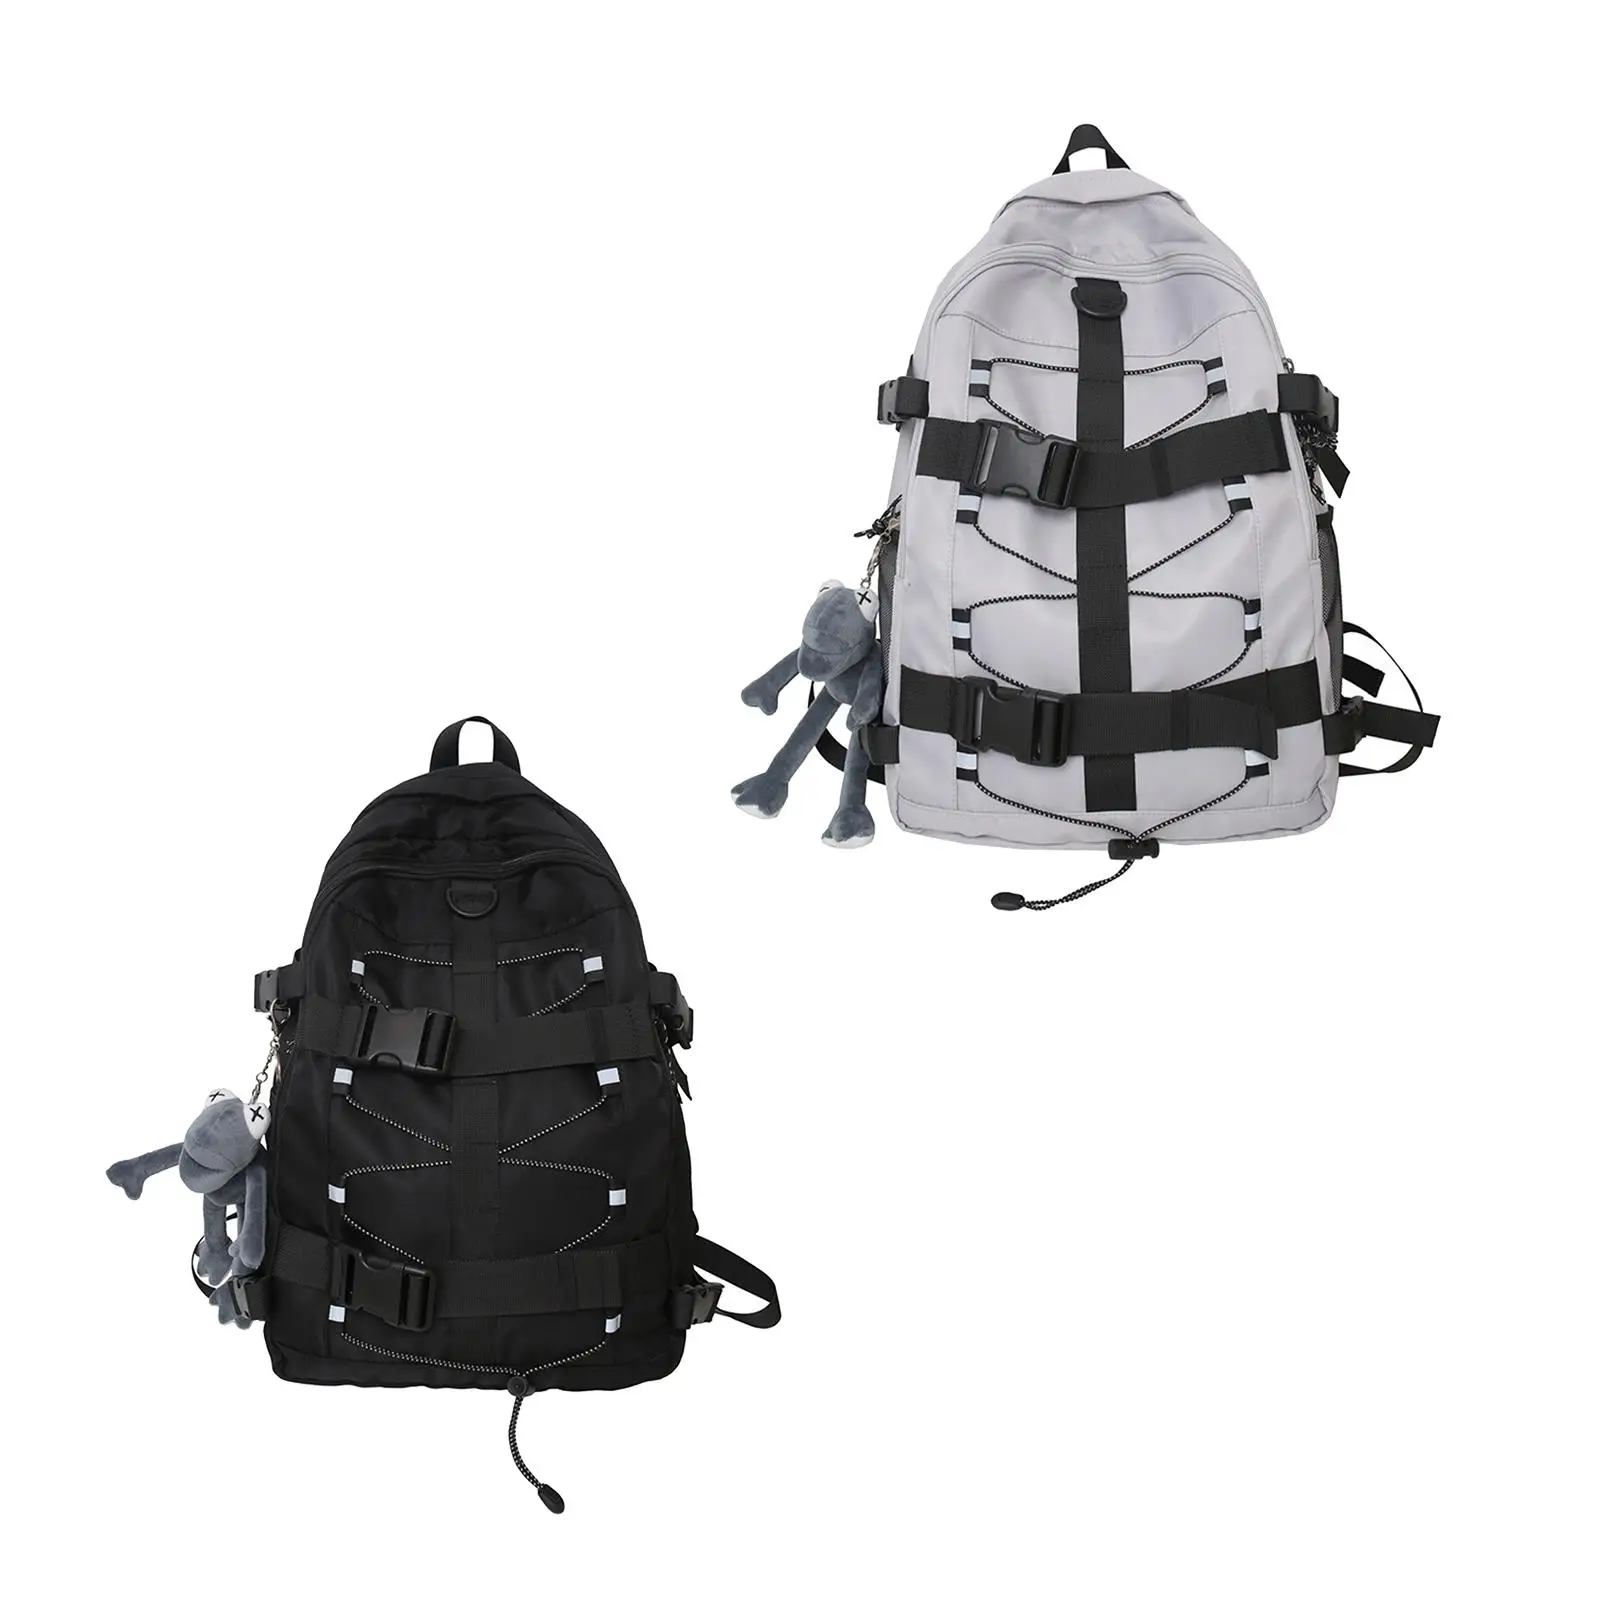 Ski Backpack Universal Carrier Male Travel Bags for Climbing Camping Adults